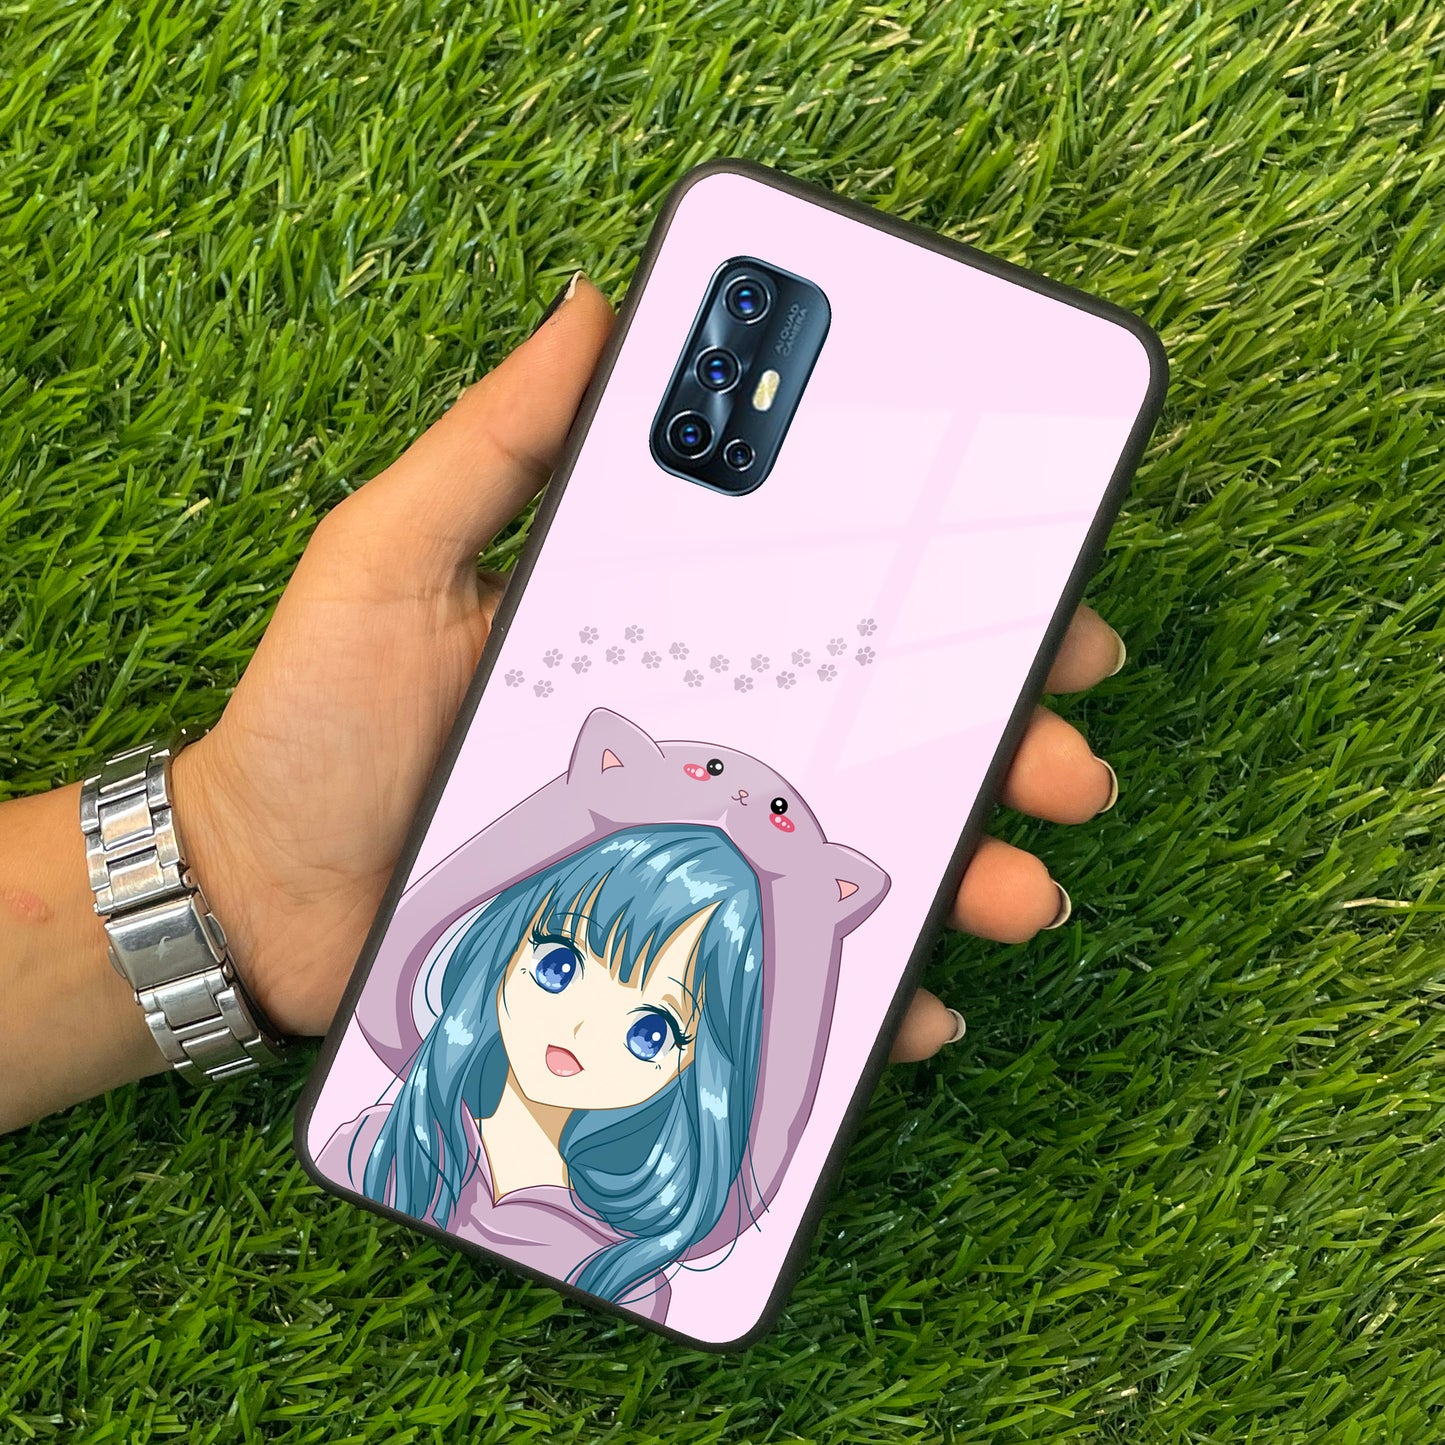 Purple Aesthetic Girl With Cat Phone Glass Case Cover For Vivo